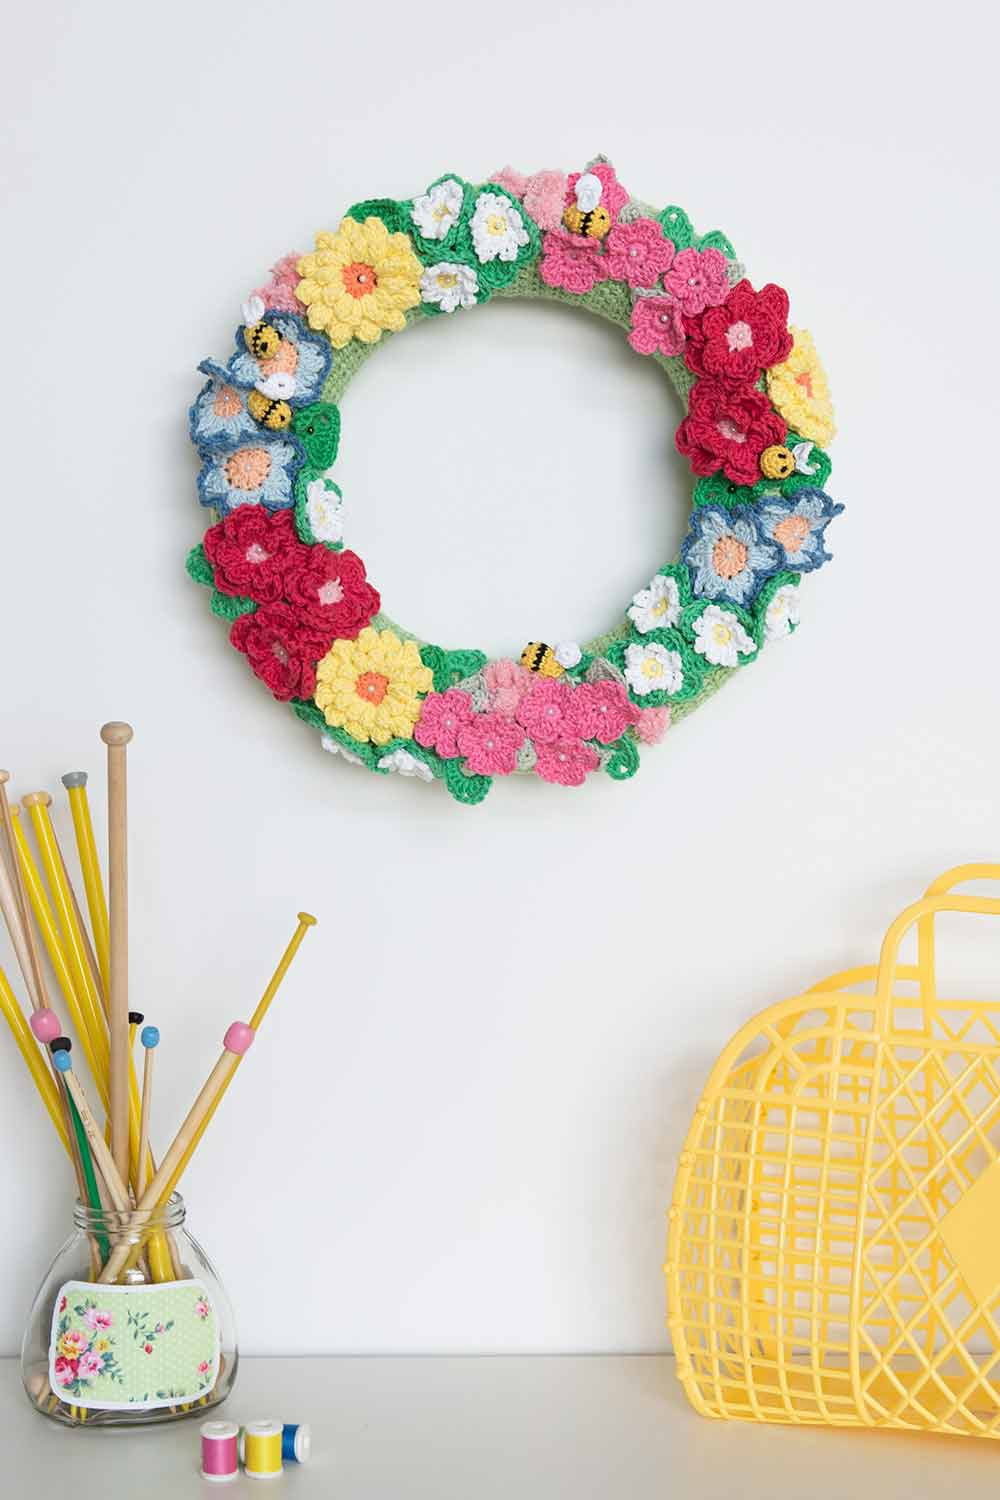 Crochet Flowers Pattern 40 Crochet Flower Patterns And What To Do With Them Mollie Makes